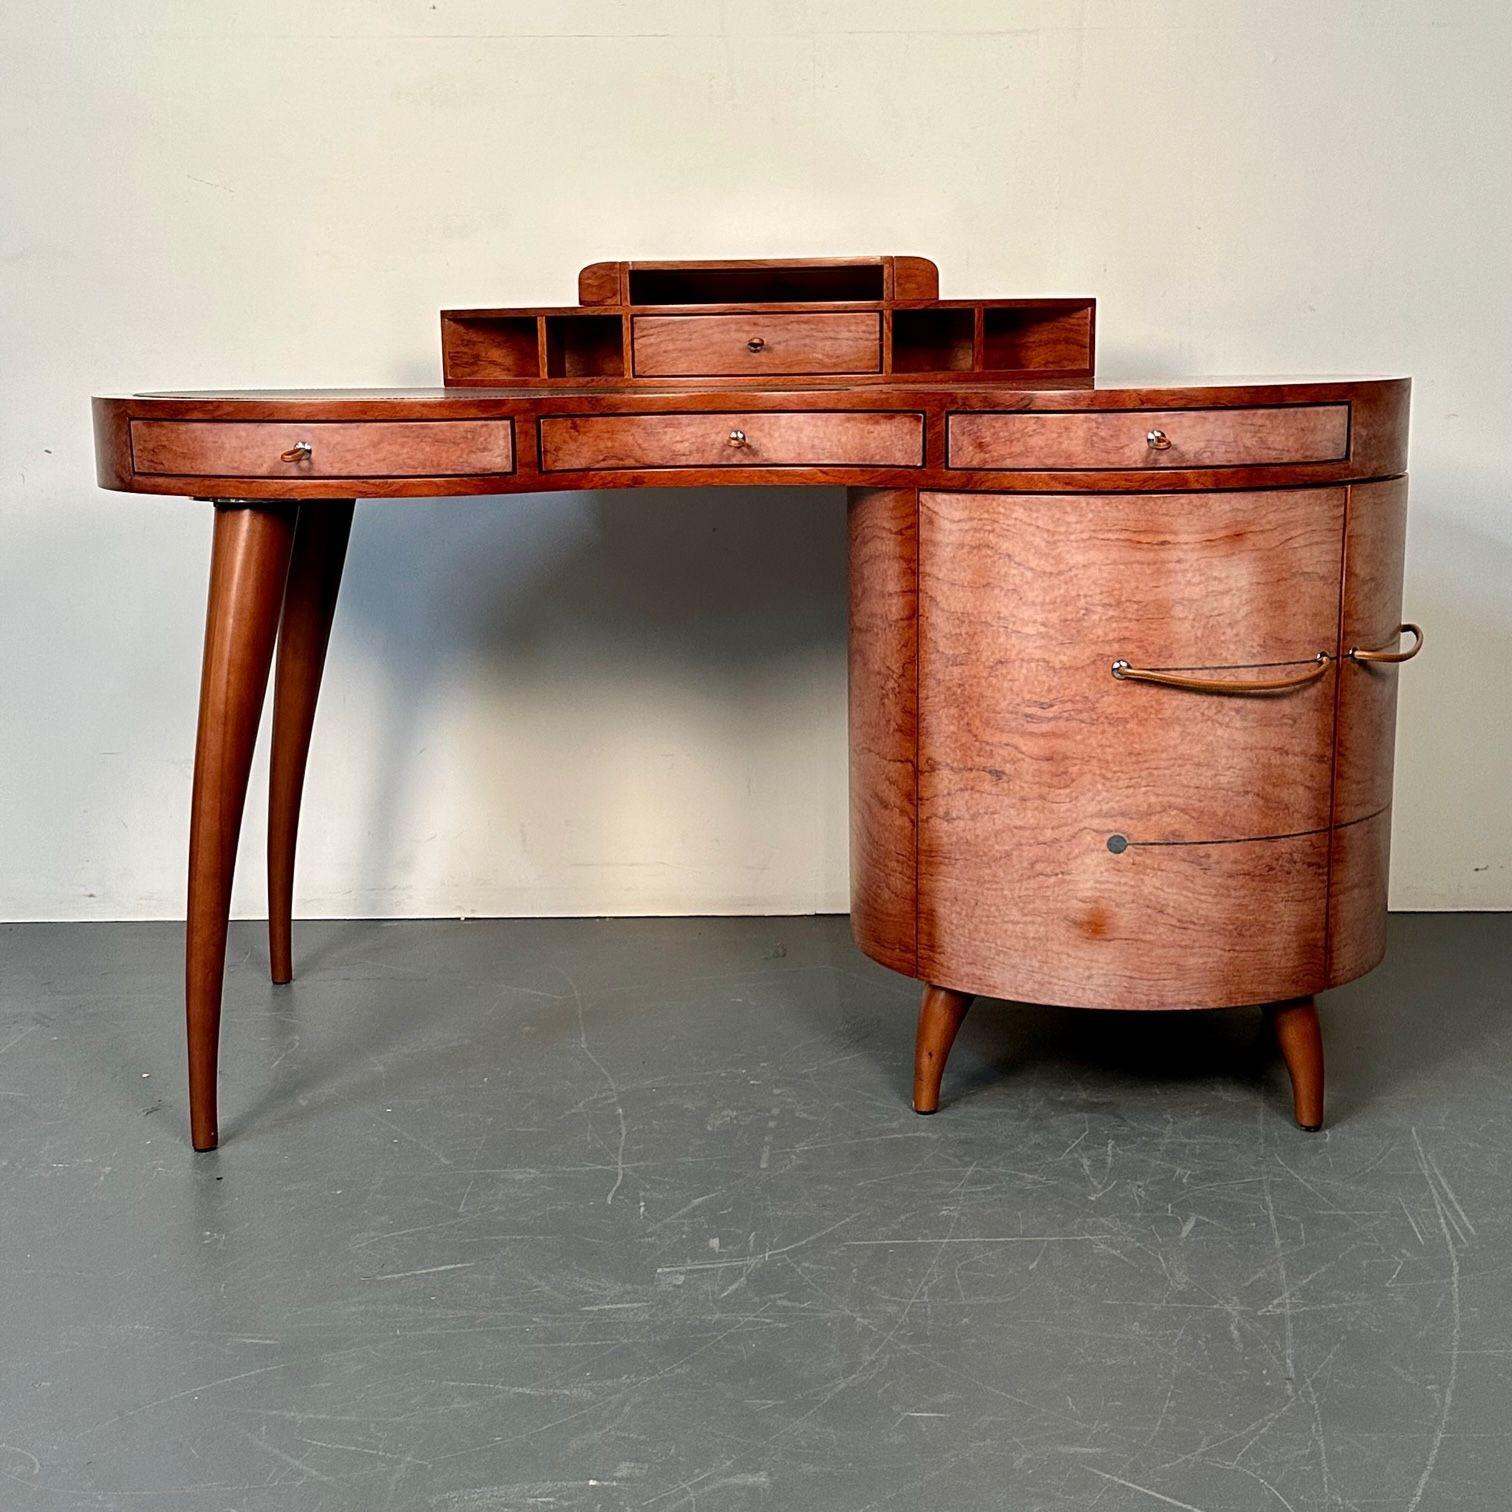 Italian Mid-Century Modern Desk / Writing Table by Maurice Villency, Deco Style

A sleek and stylish deco style design desk by Maurice Villency. Having a circular side table leading to a knee hole desk with two drawers under a leather table top